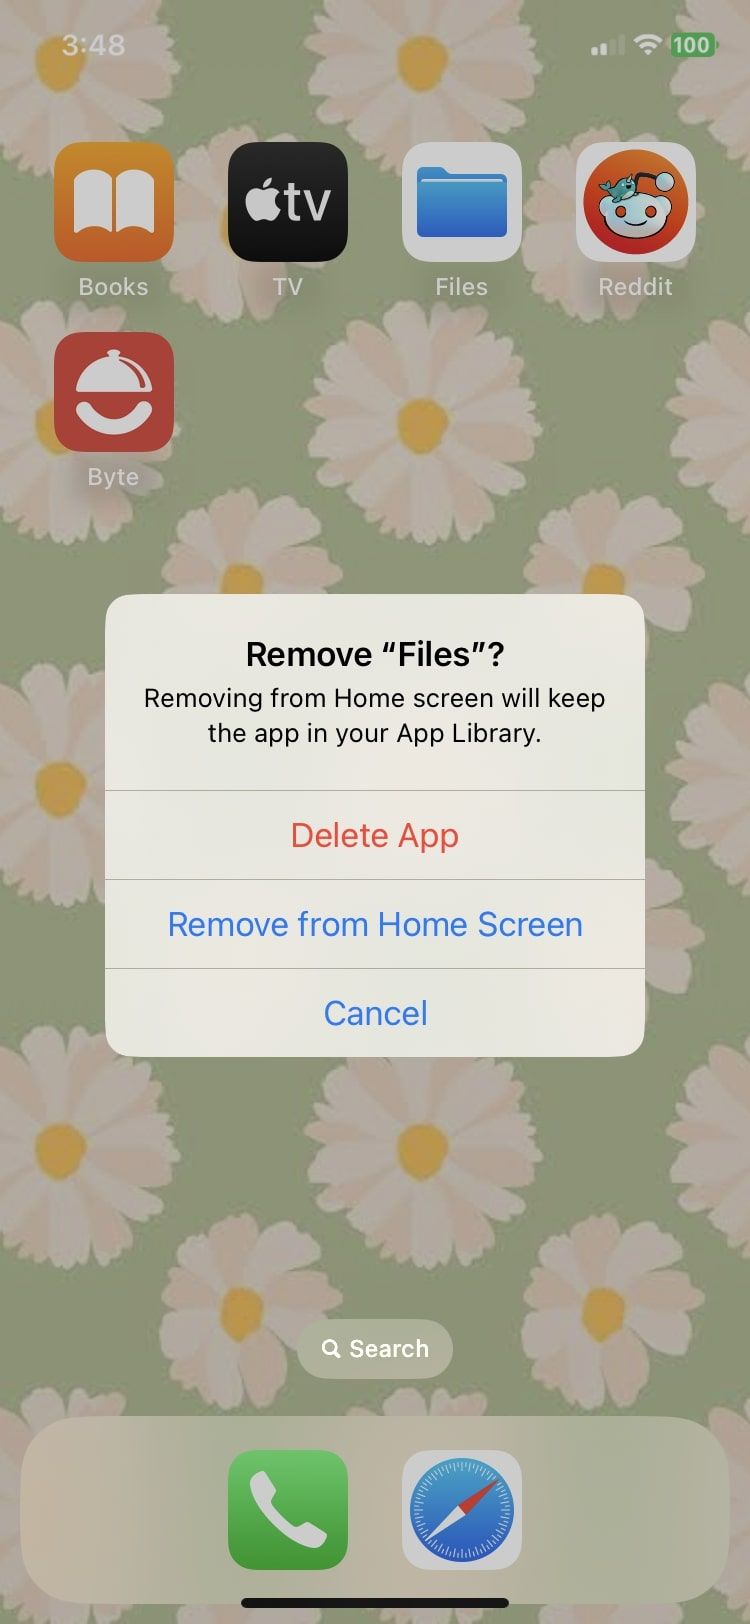 Remove from home screen options